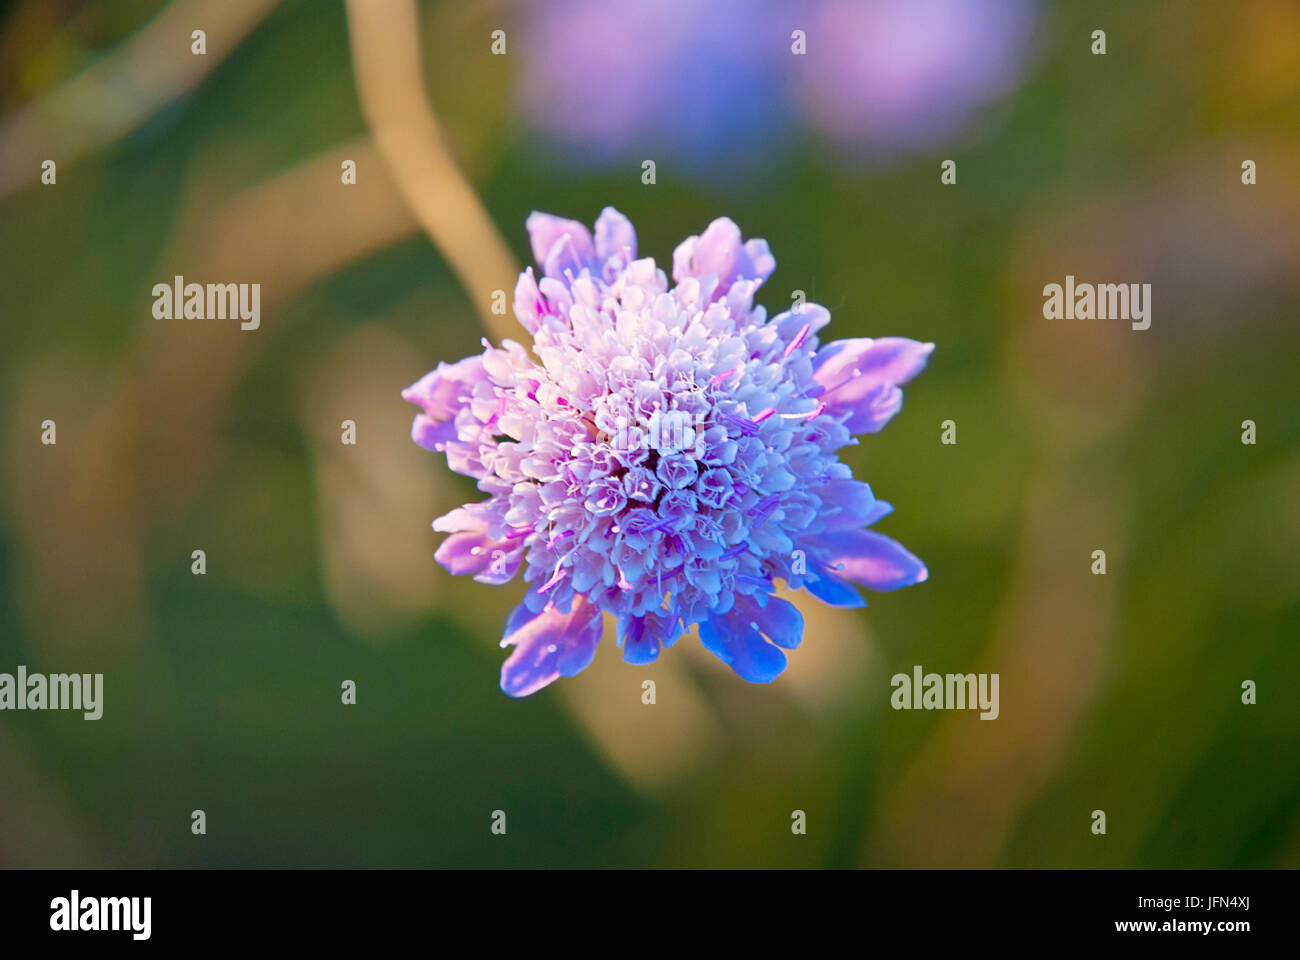 Field Scabious flower blossoming closeup Stock Photo